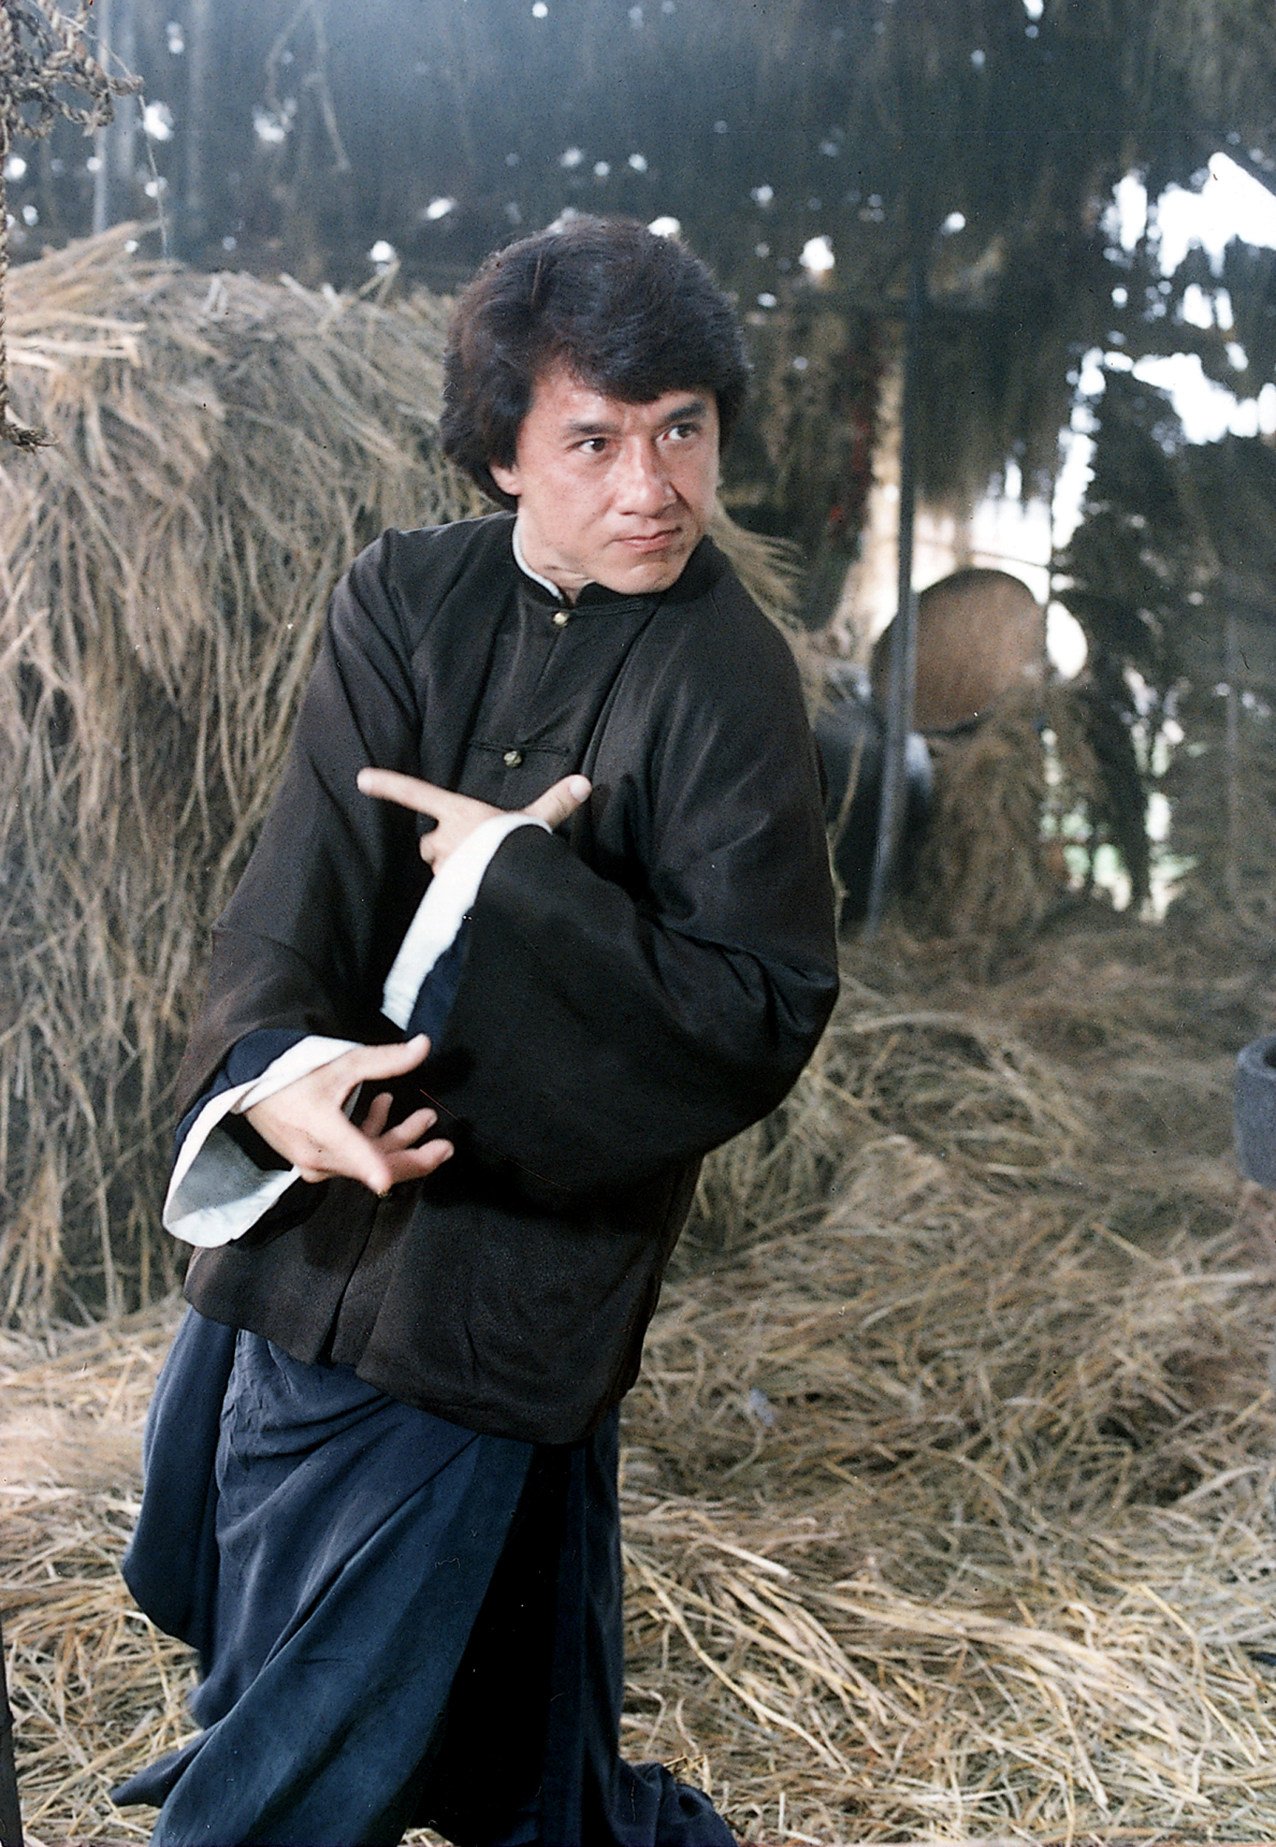 Jackie Chan in a still from Drunken Master II (1994). The movie focused heavily on real kung fu by real martial artists, as an antidote to the slew of shoddy ‘wire fu’ movies in the early 1990s.